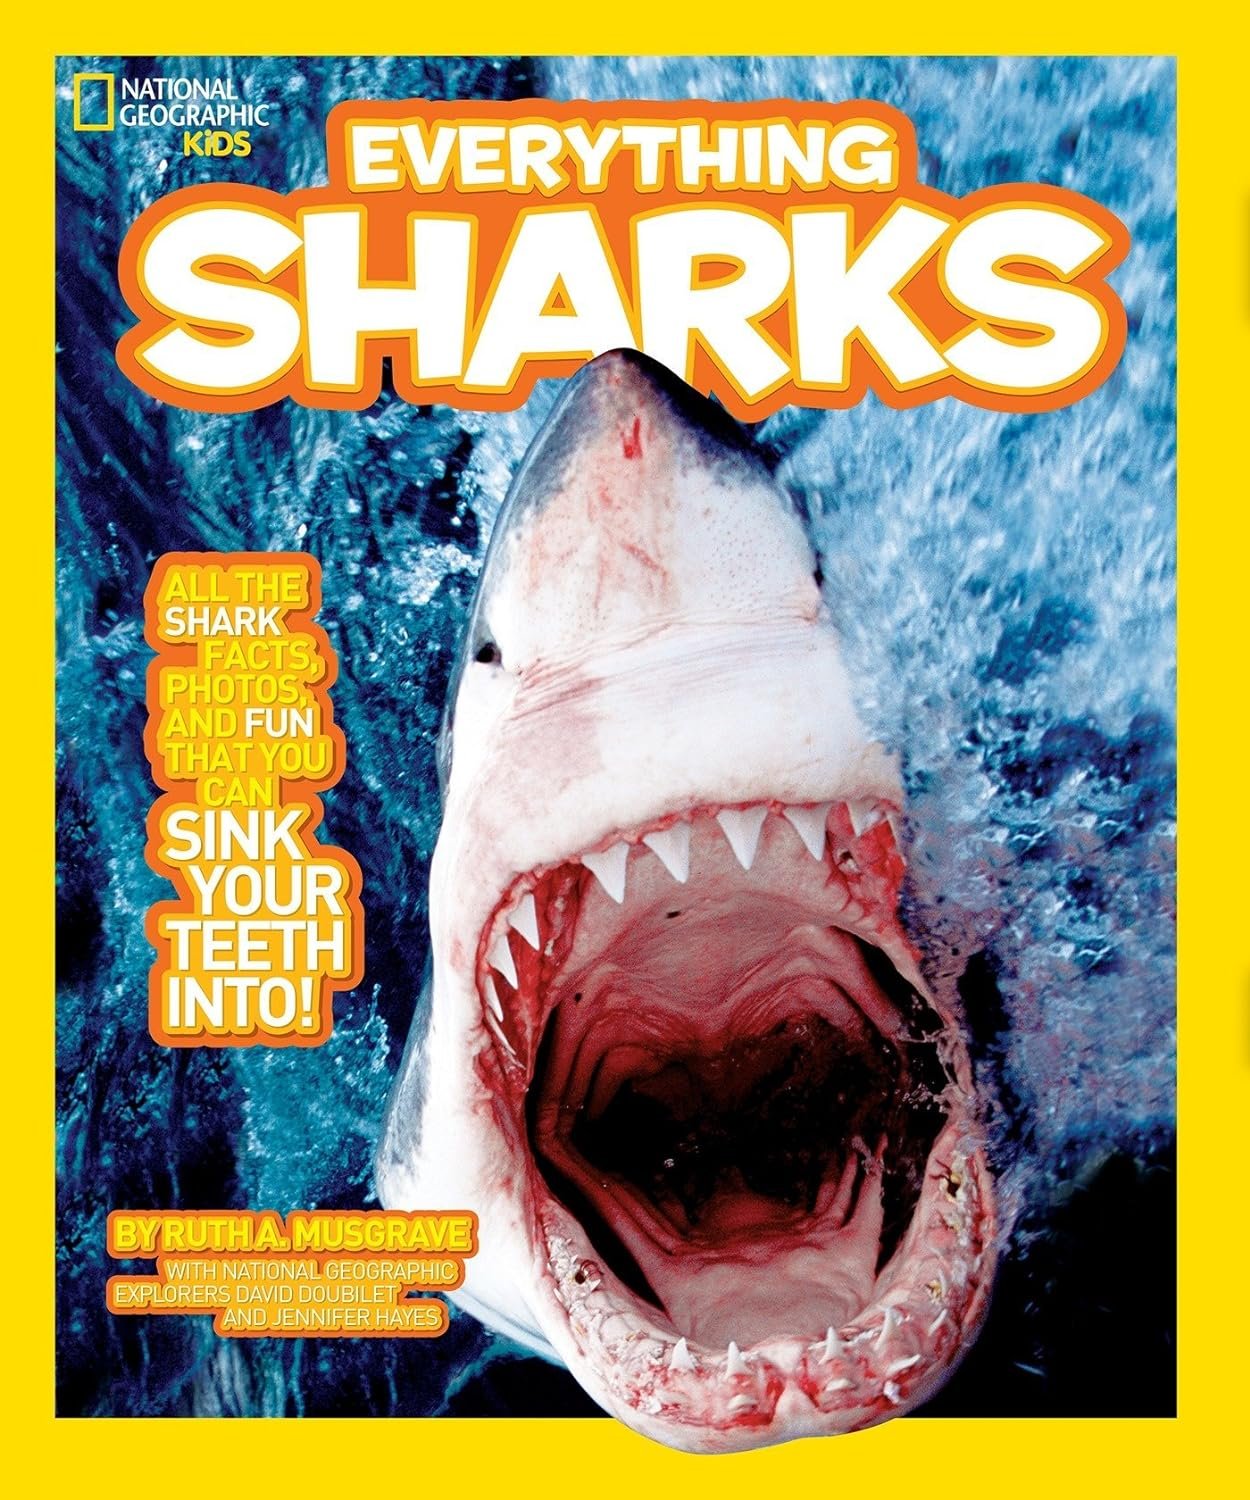 National Geographic Kids Everything Sharks: All the shark facts, photos, and fun that you can sink your teeth into